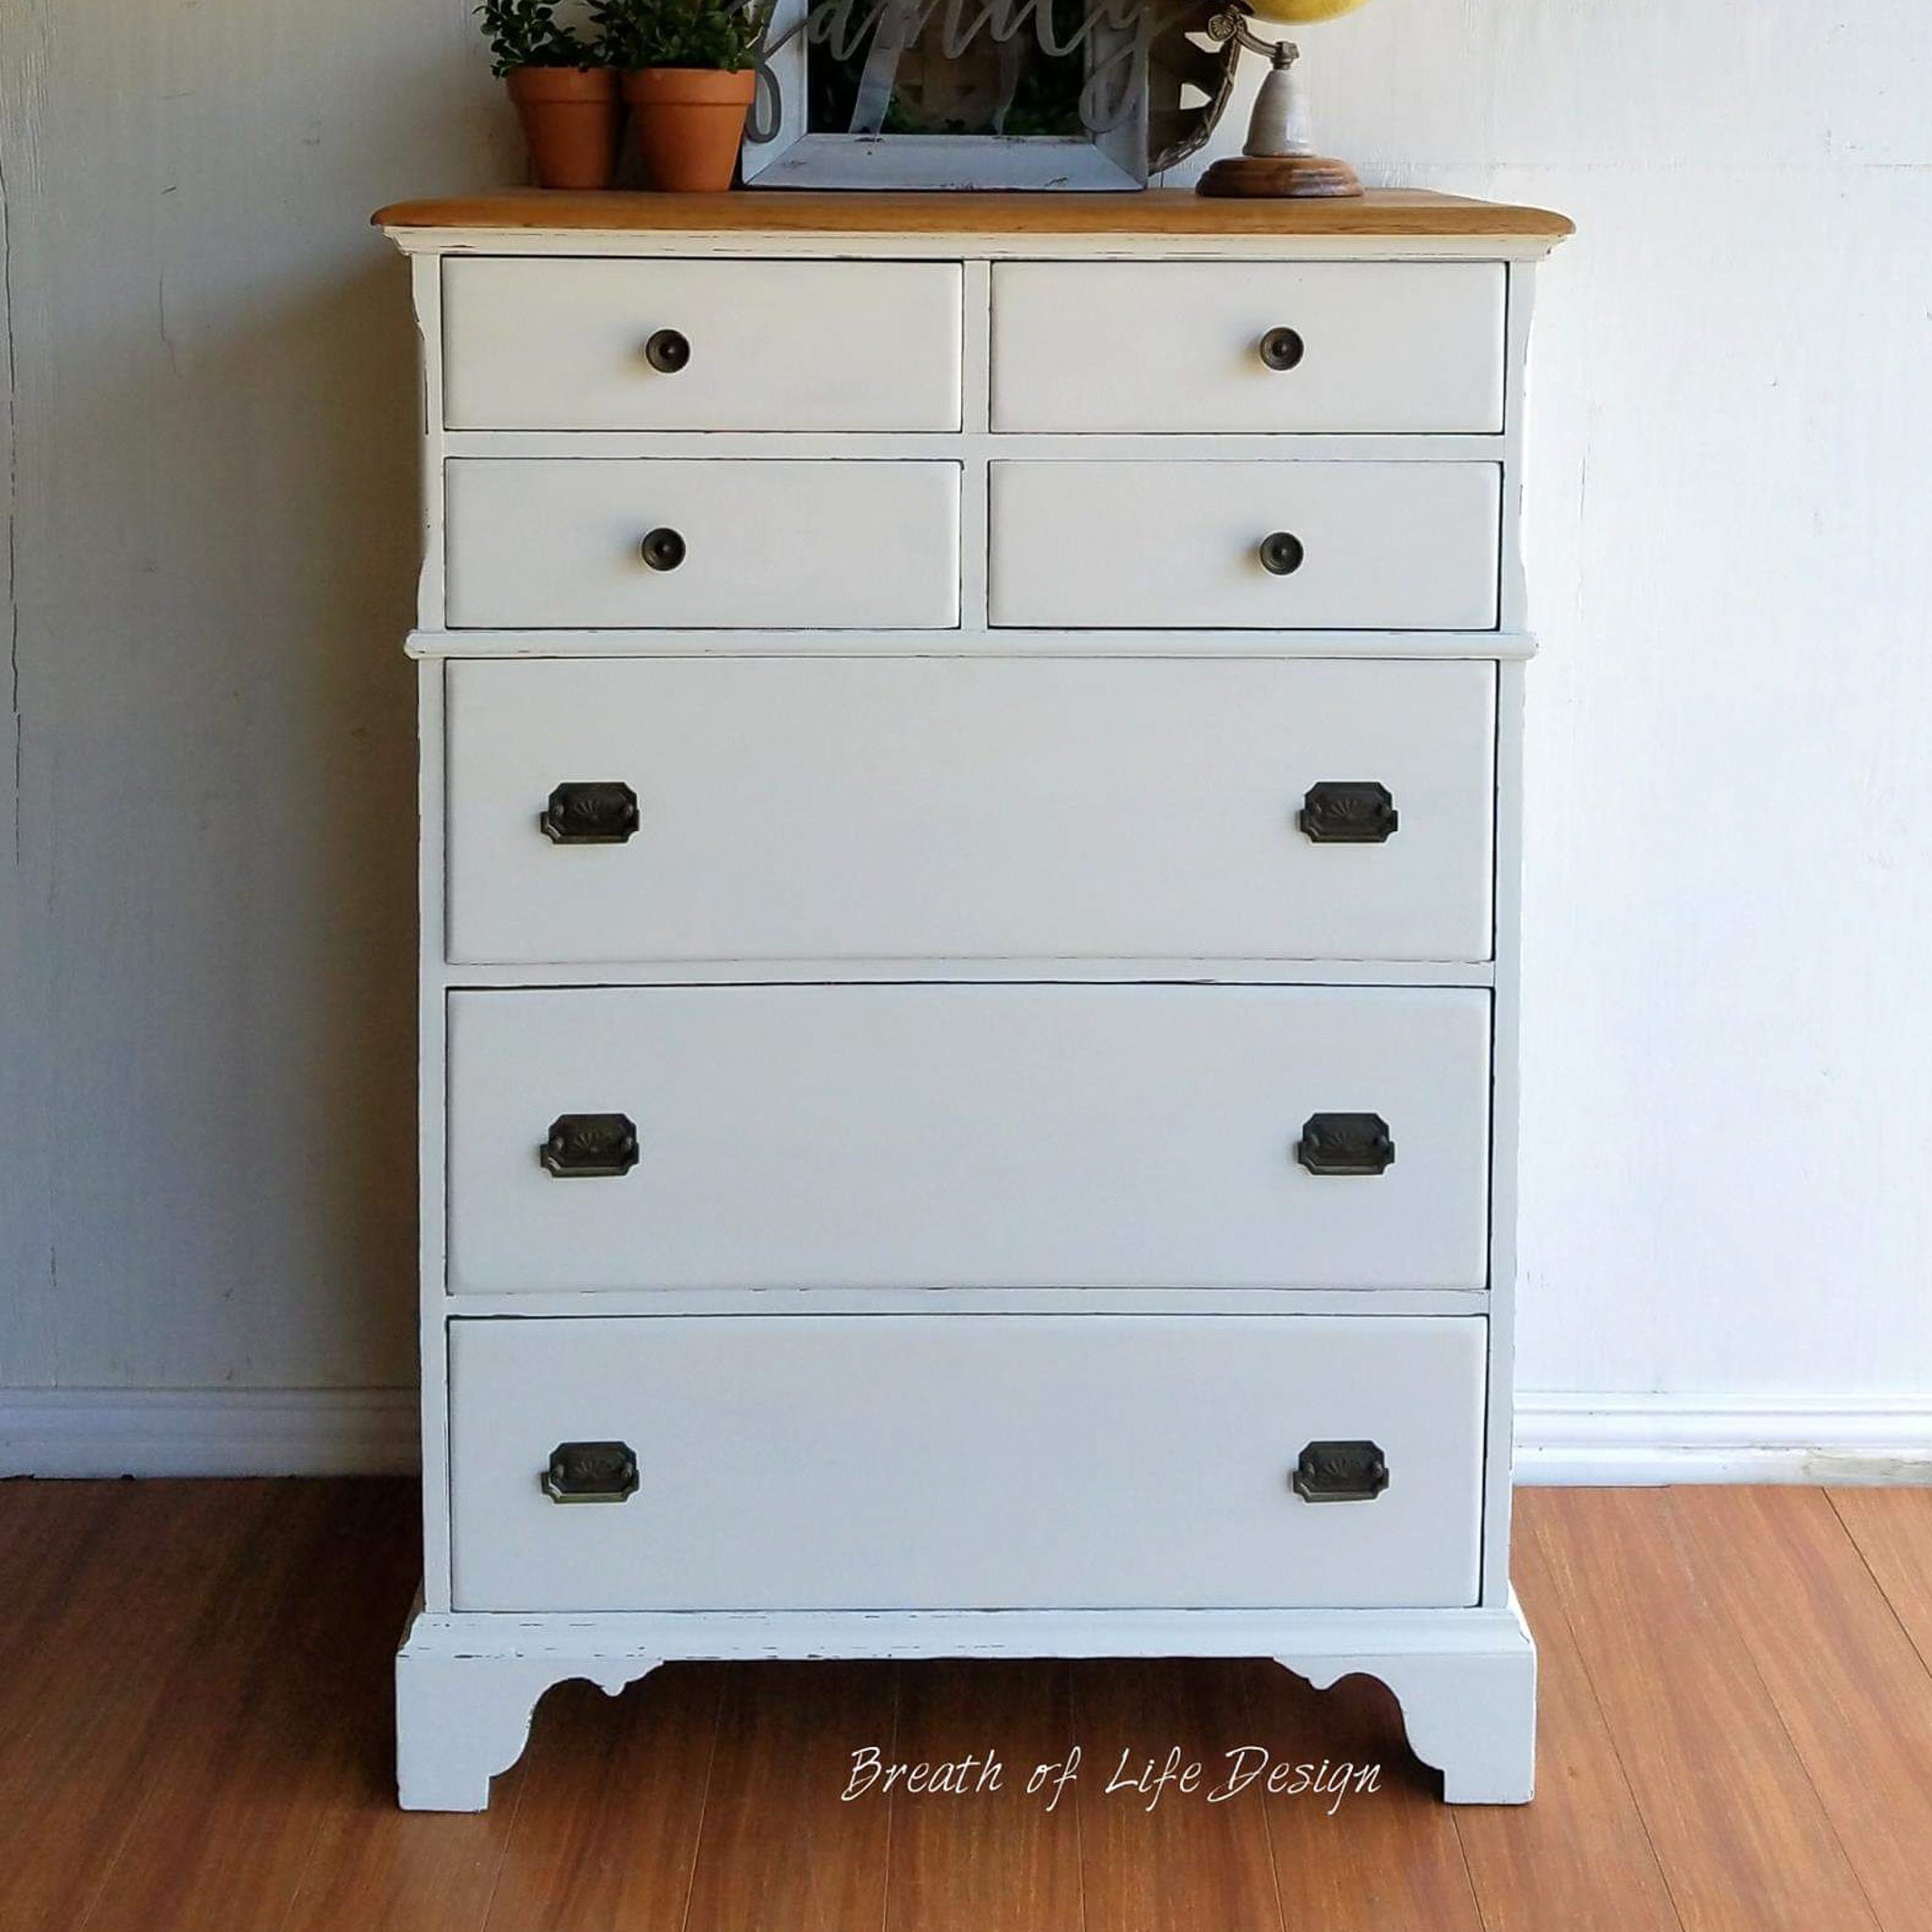 A 7-drawer vintage chest dresser refurbished by Breath of Life Design is painted in Dixie Belle's Buttercream chalk mineral paint.